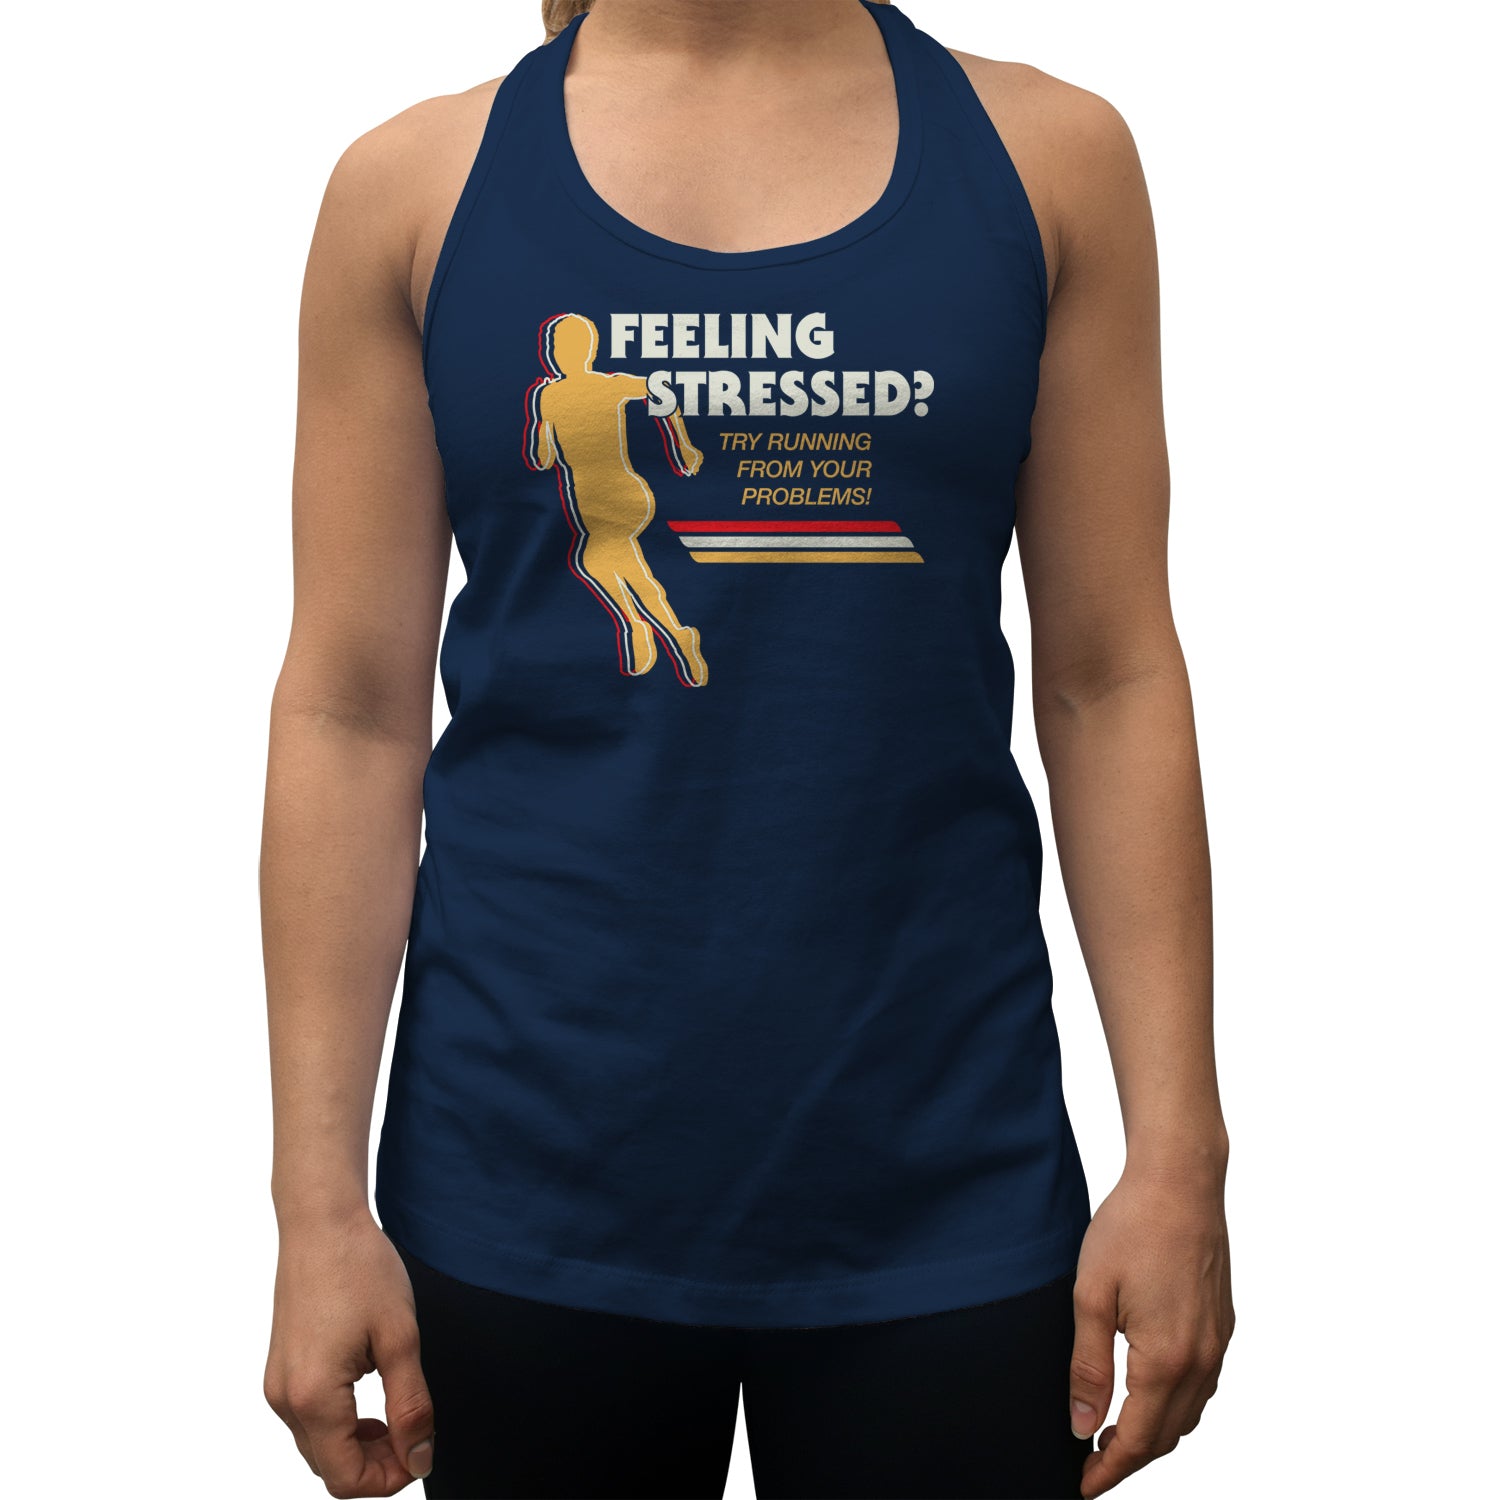 Women's Feeling Stressed? Try Running from Your Problems Racerback Tank Top